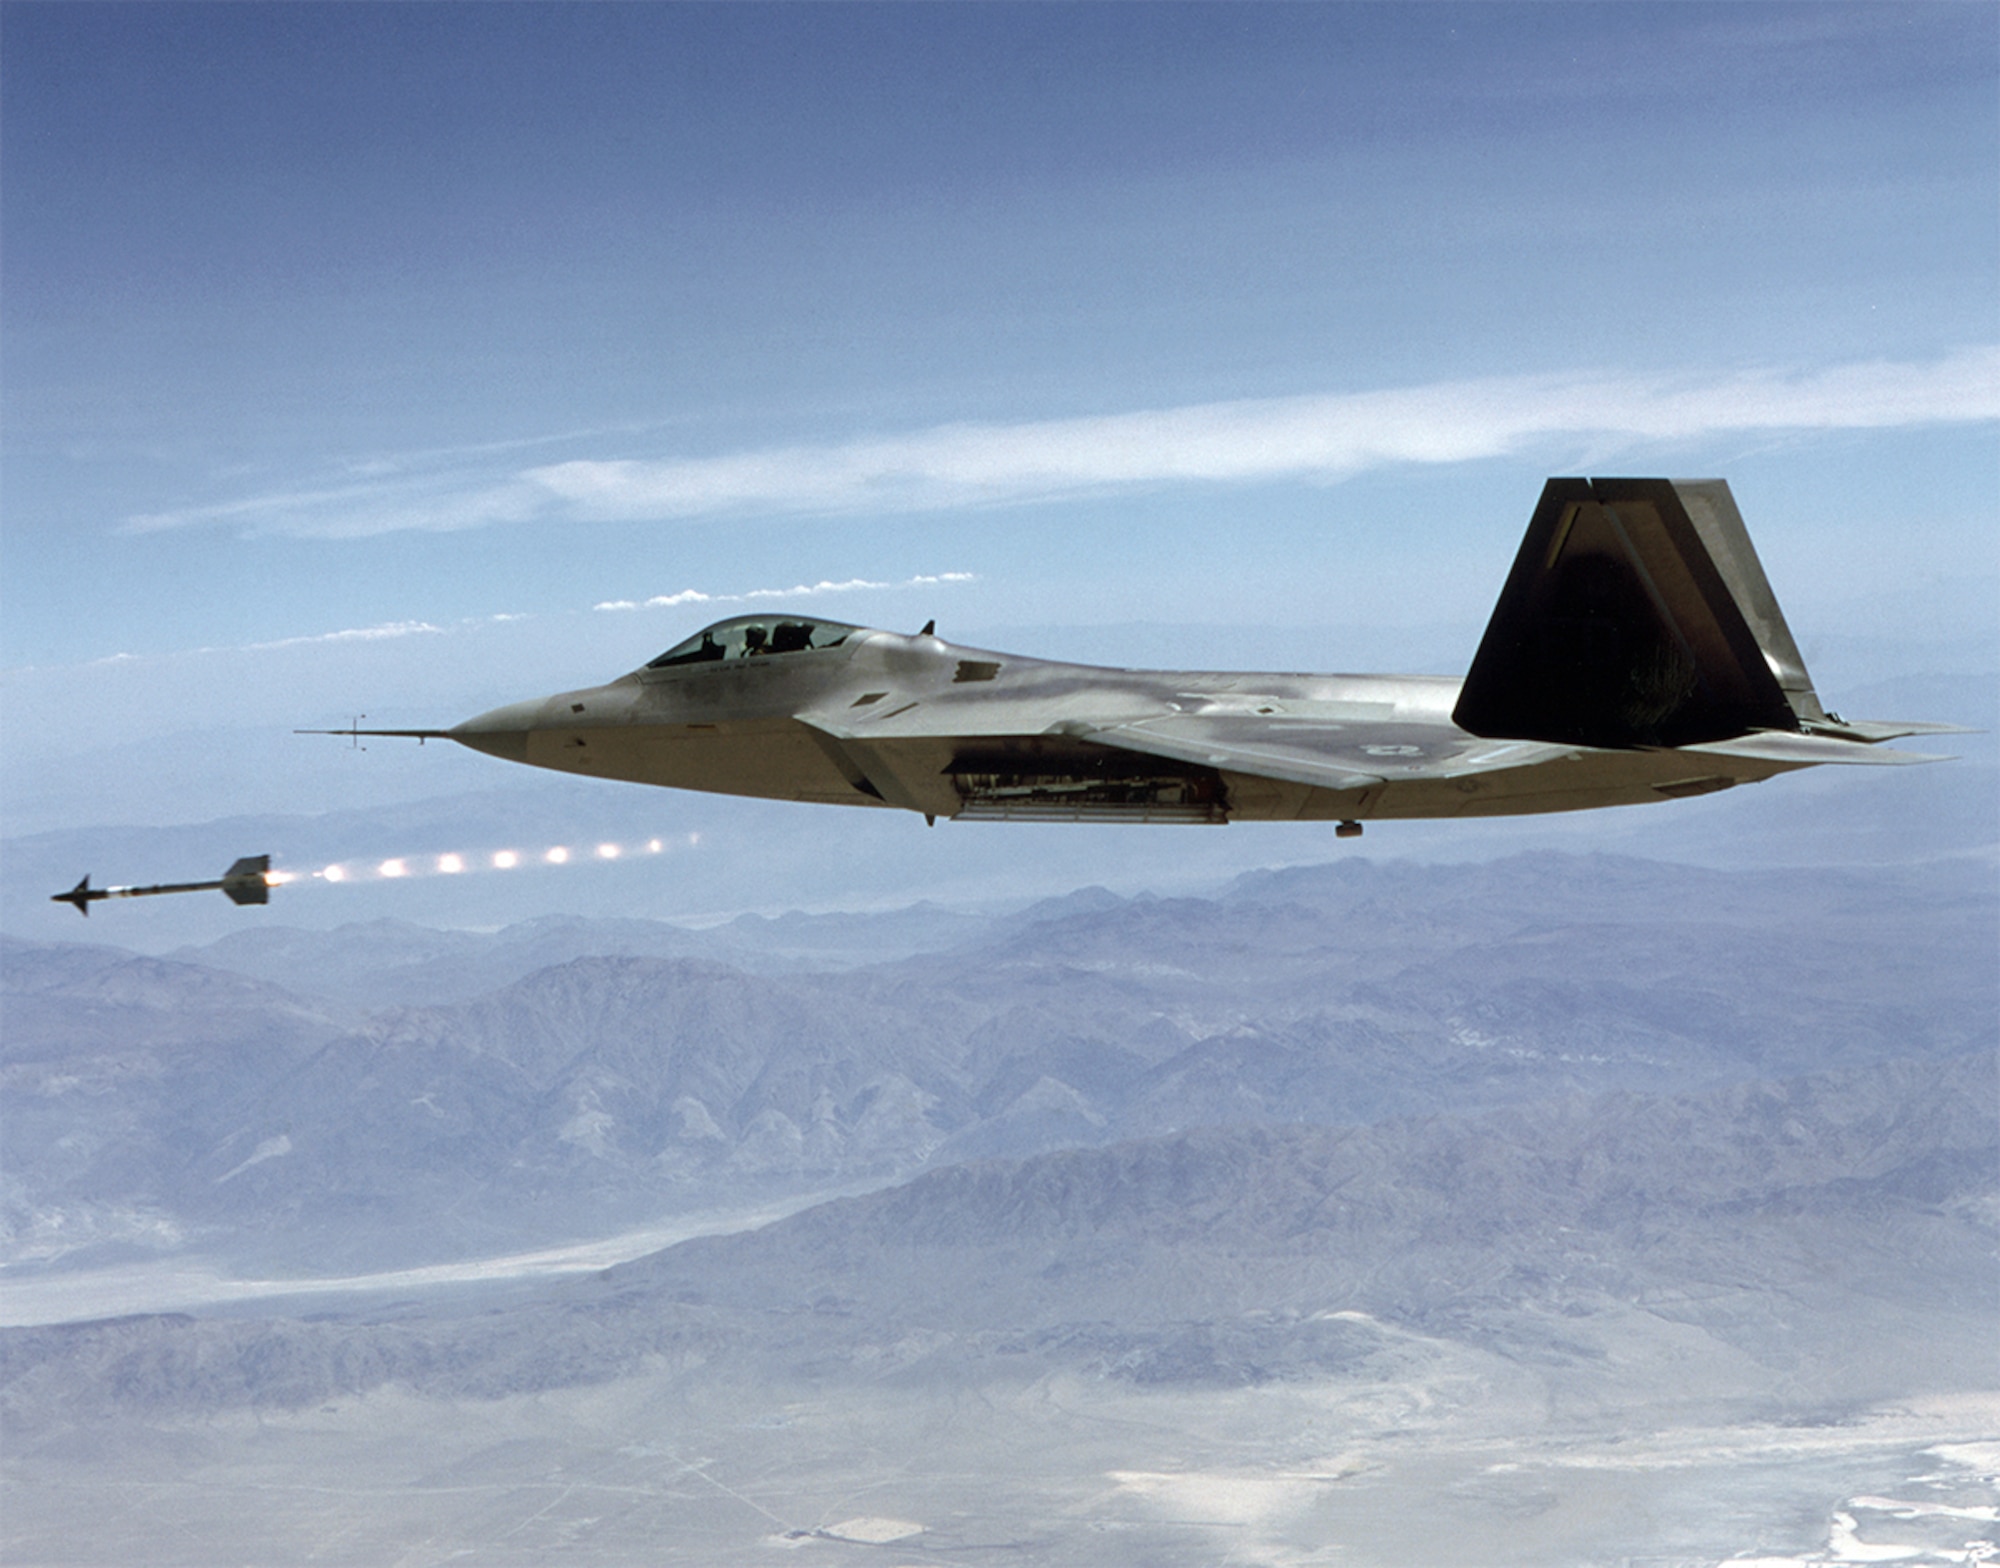 #OTD 25 Jul 2000 at Edwards - The F-22 CTF’s Raptor 02 successfully launched an AIM-9 “Sidewinder” missile over the China Lake test range.  The test confirmed the F-22’s ability to launch an air-to-air missile from an internal weapons bay. (Edwards History Office file photo)